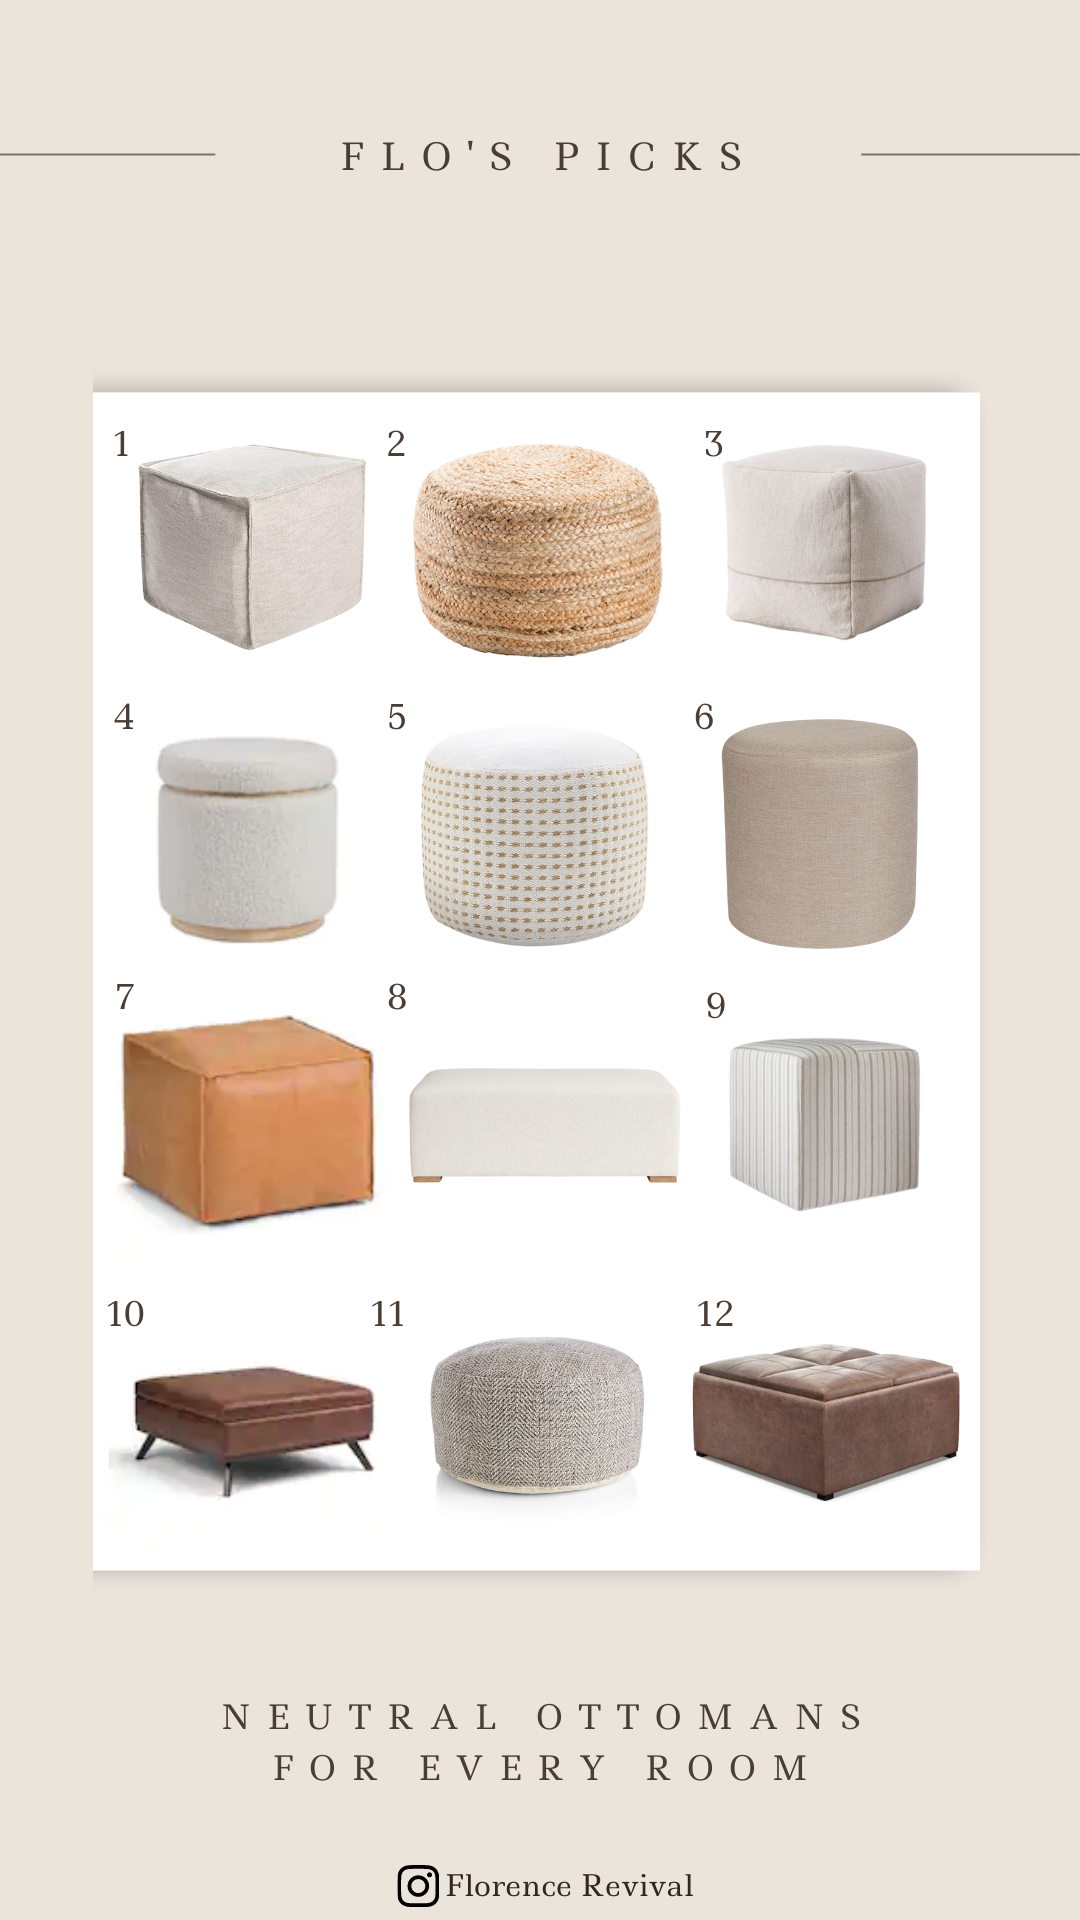 Images of my favorites for my ottoman roundup.